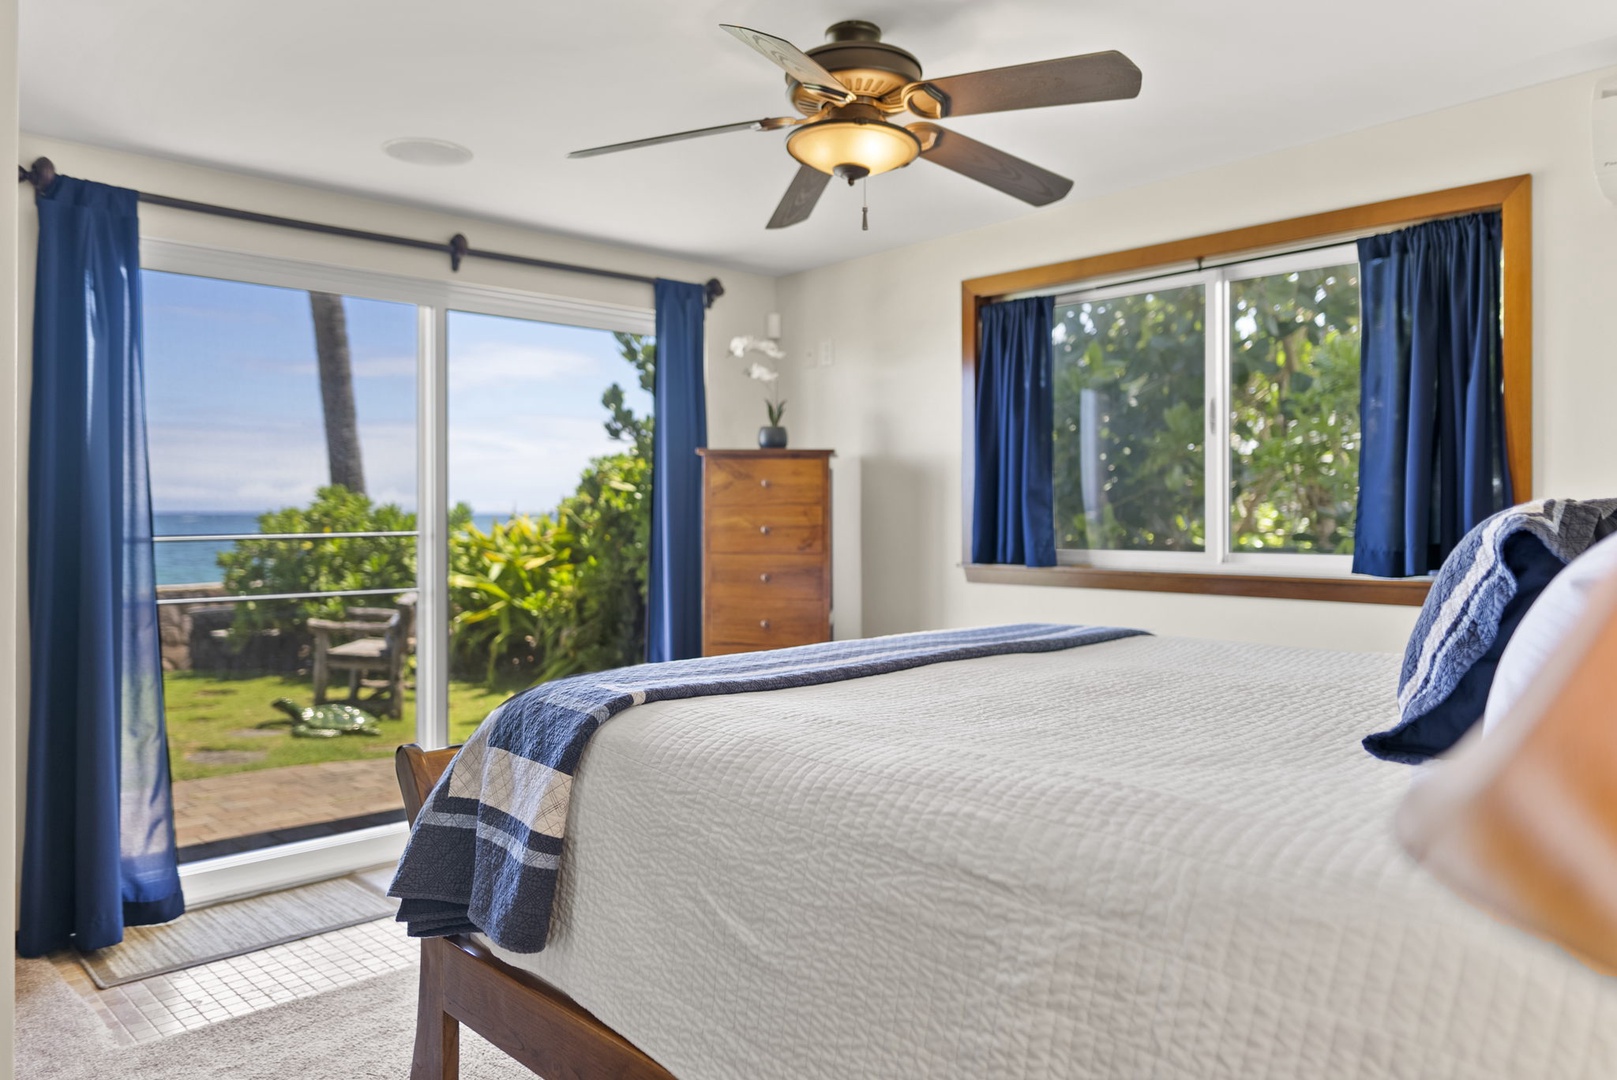 Waialua Vacation Rentals, Hale Oka Nunu - There is also split AC and a ceiling fan in this bedroom